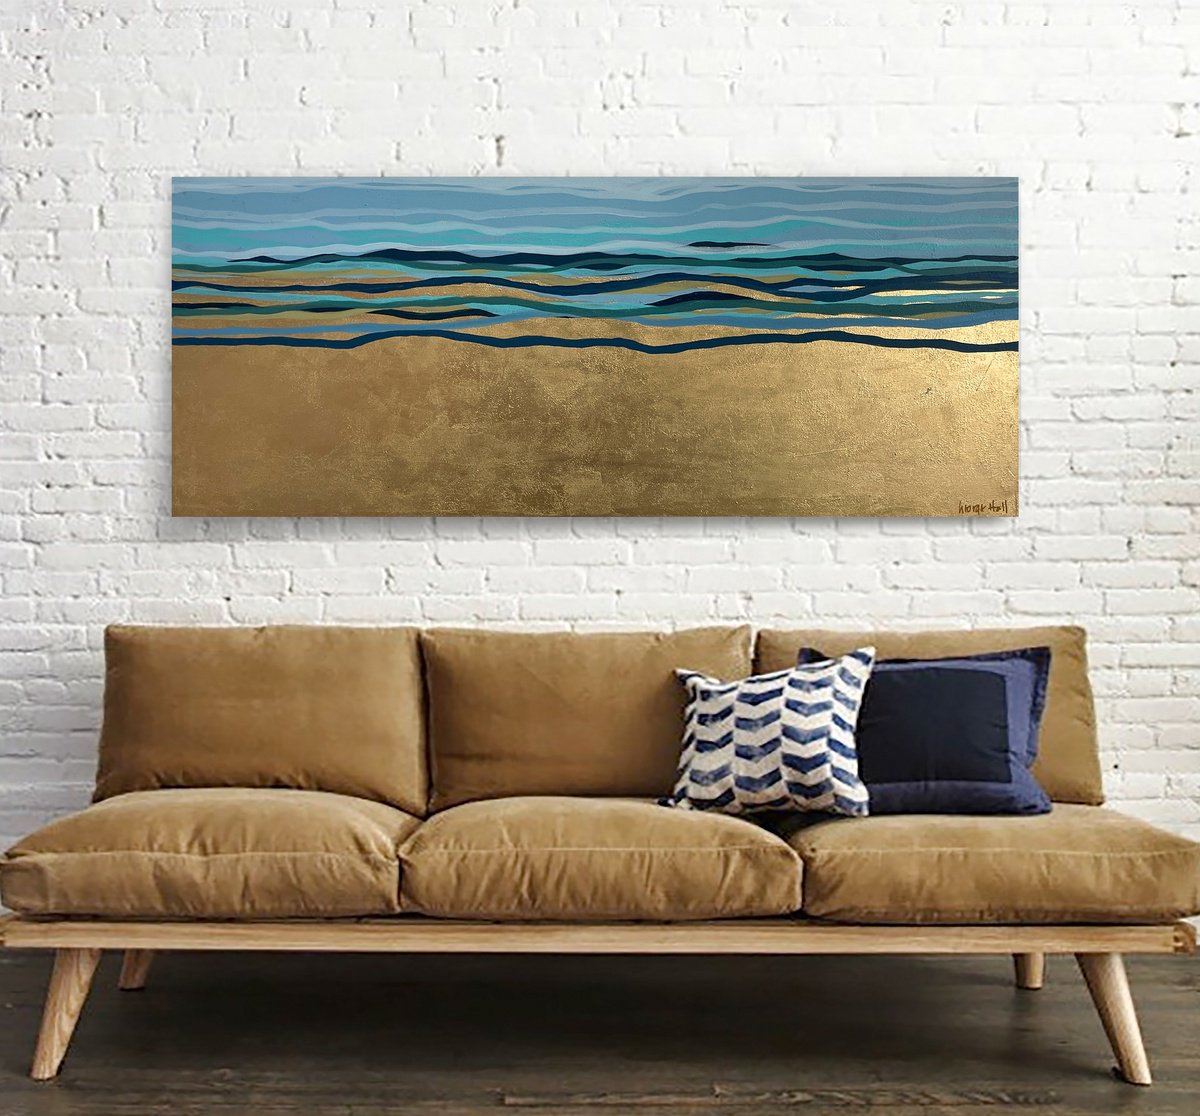 Golden Sea - 152 x 61 cm - metallic gold paint and acrylic on canvas by George Hall